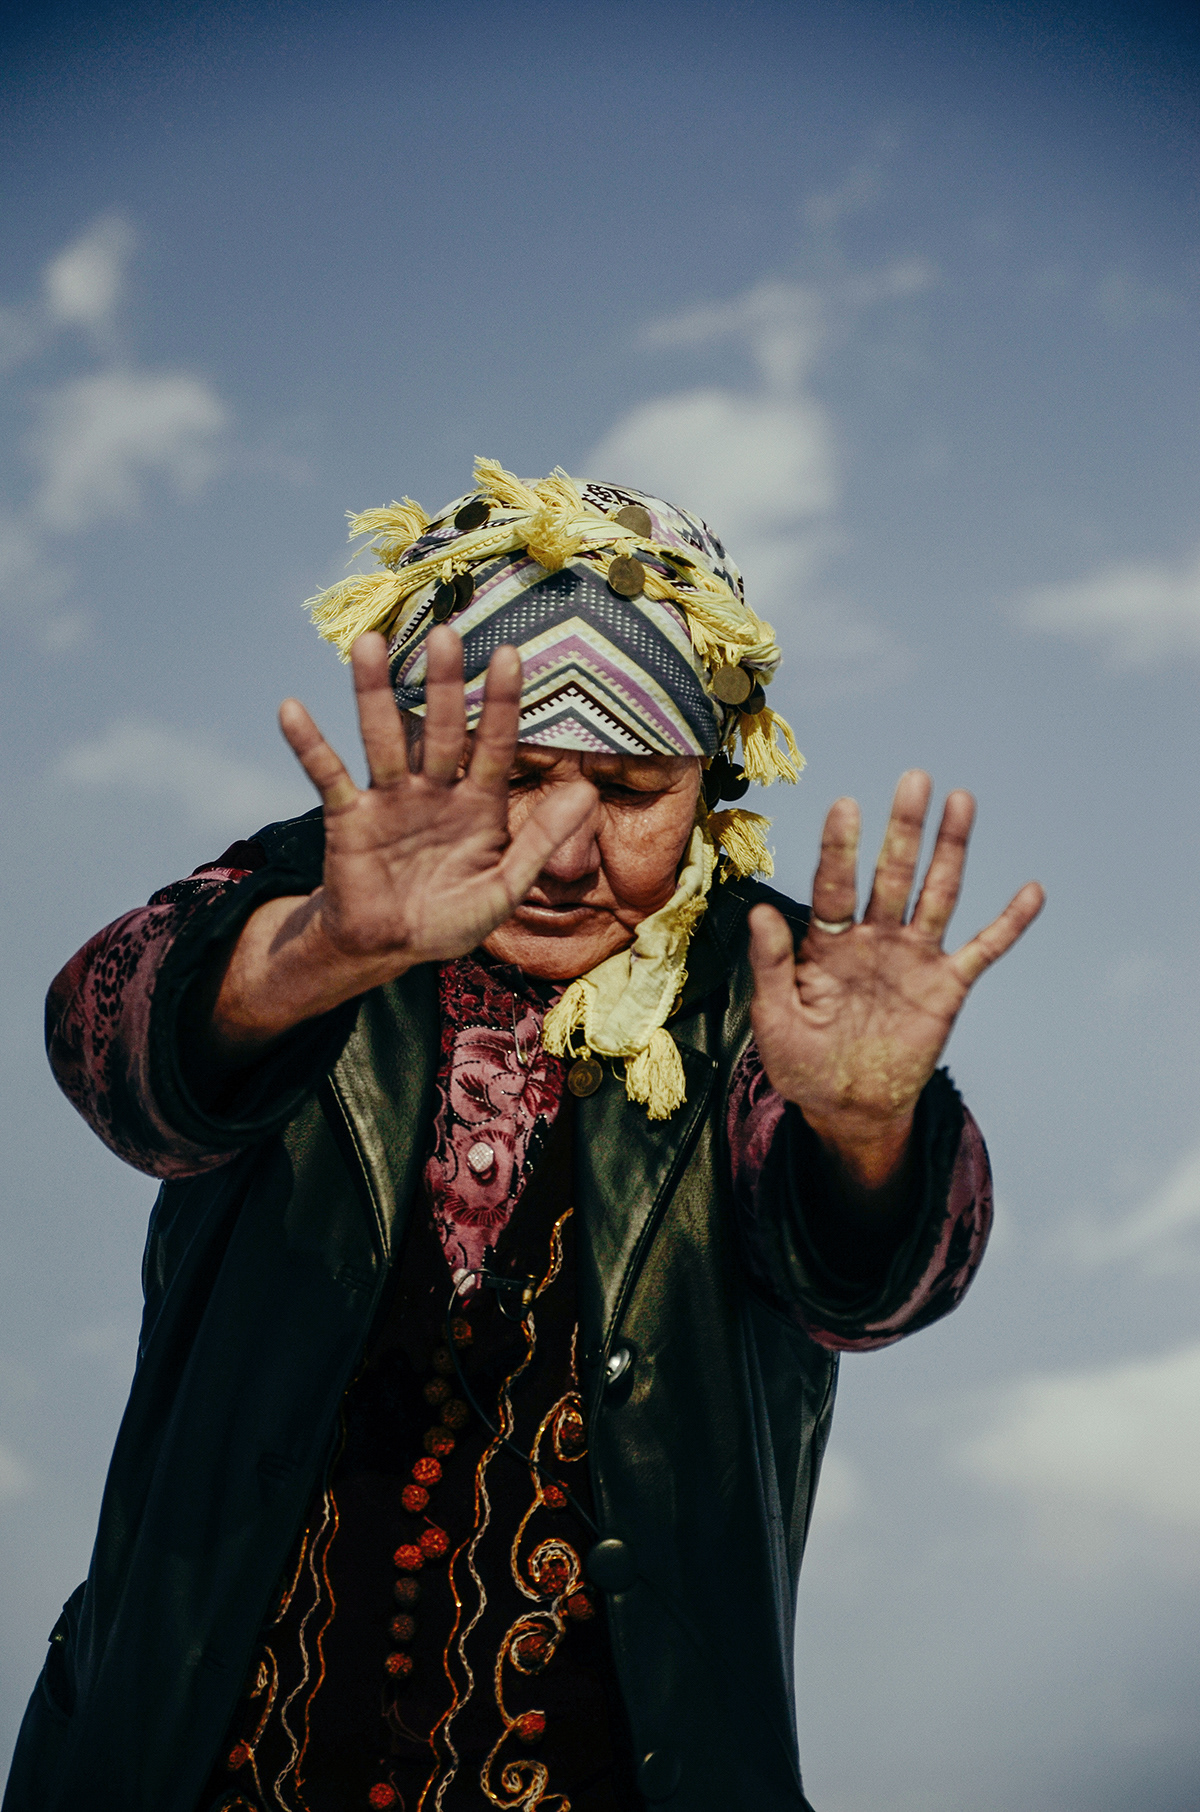 Denis Vejas Documents a Winter With a Shaman in Kazakhstan